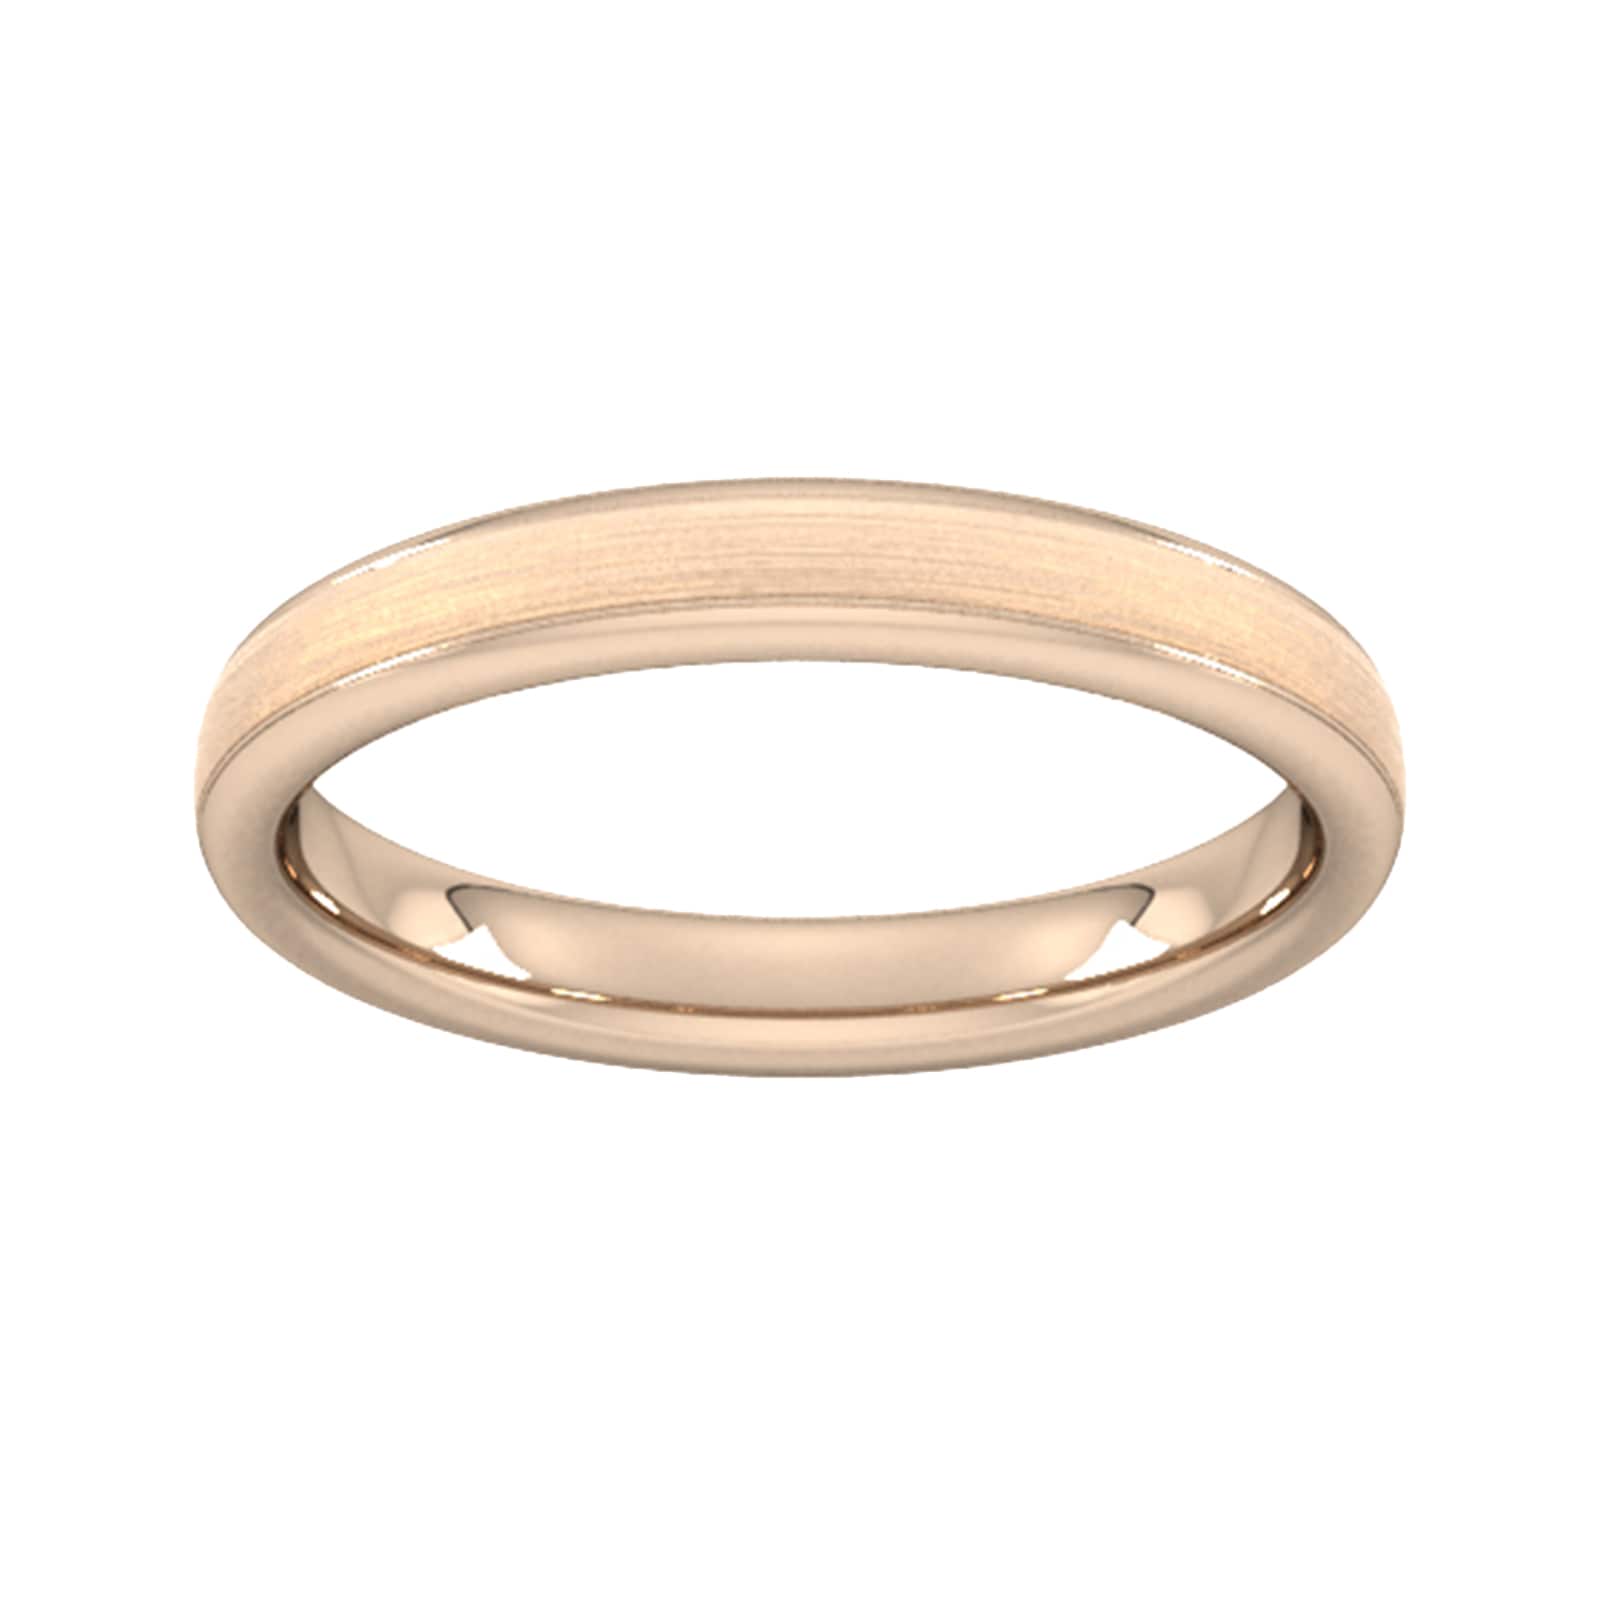 3mm D Shape Heavy Matt Centre With Grooves Wedding Ring In 18 Carat Rose Gold - Ring Size O